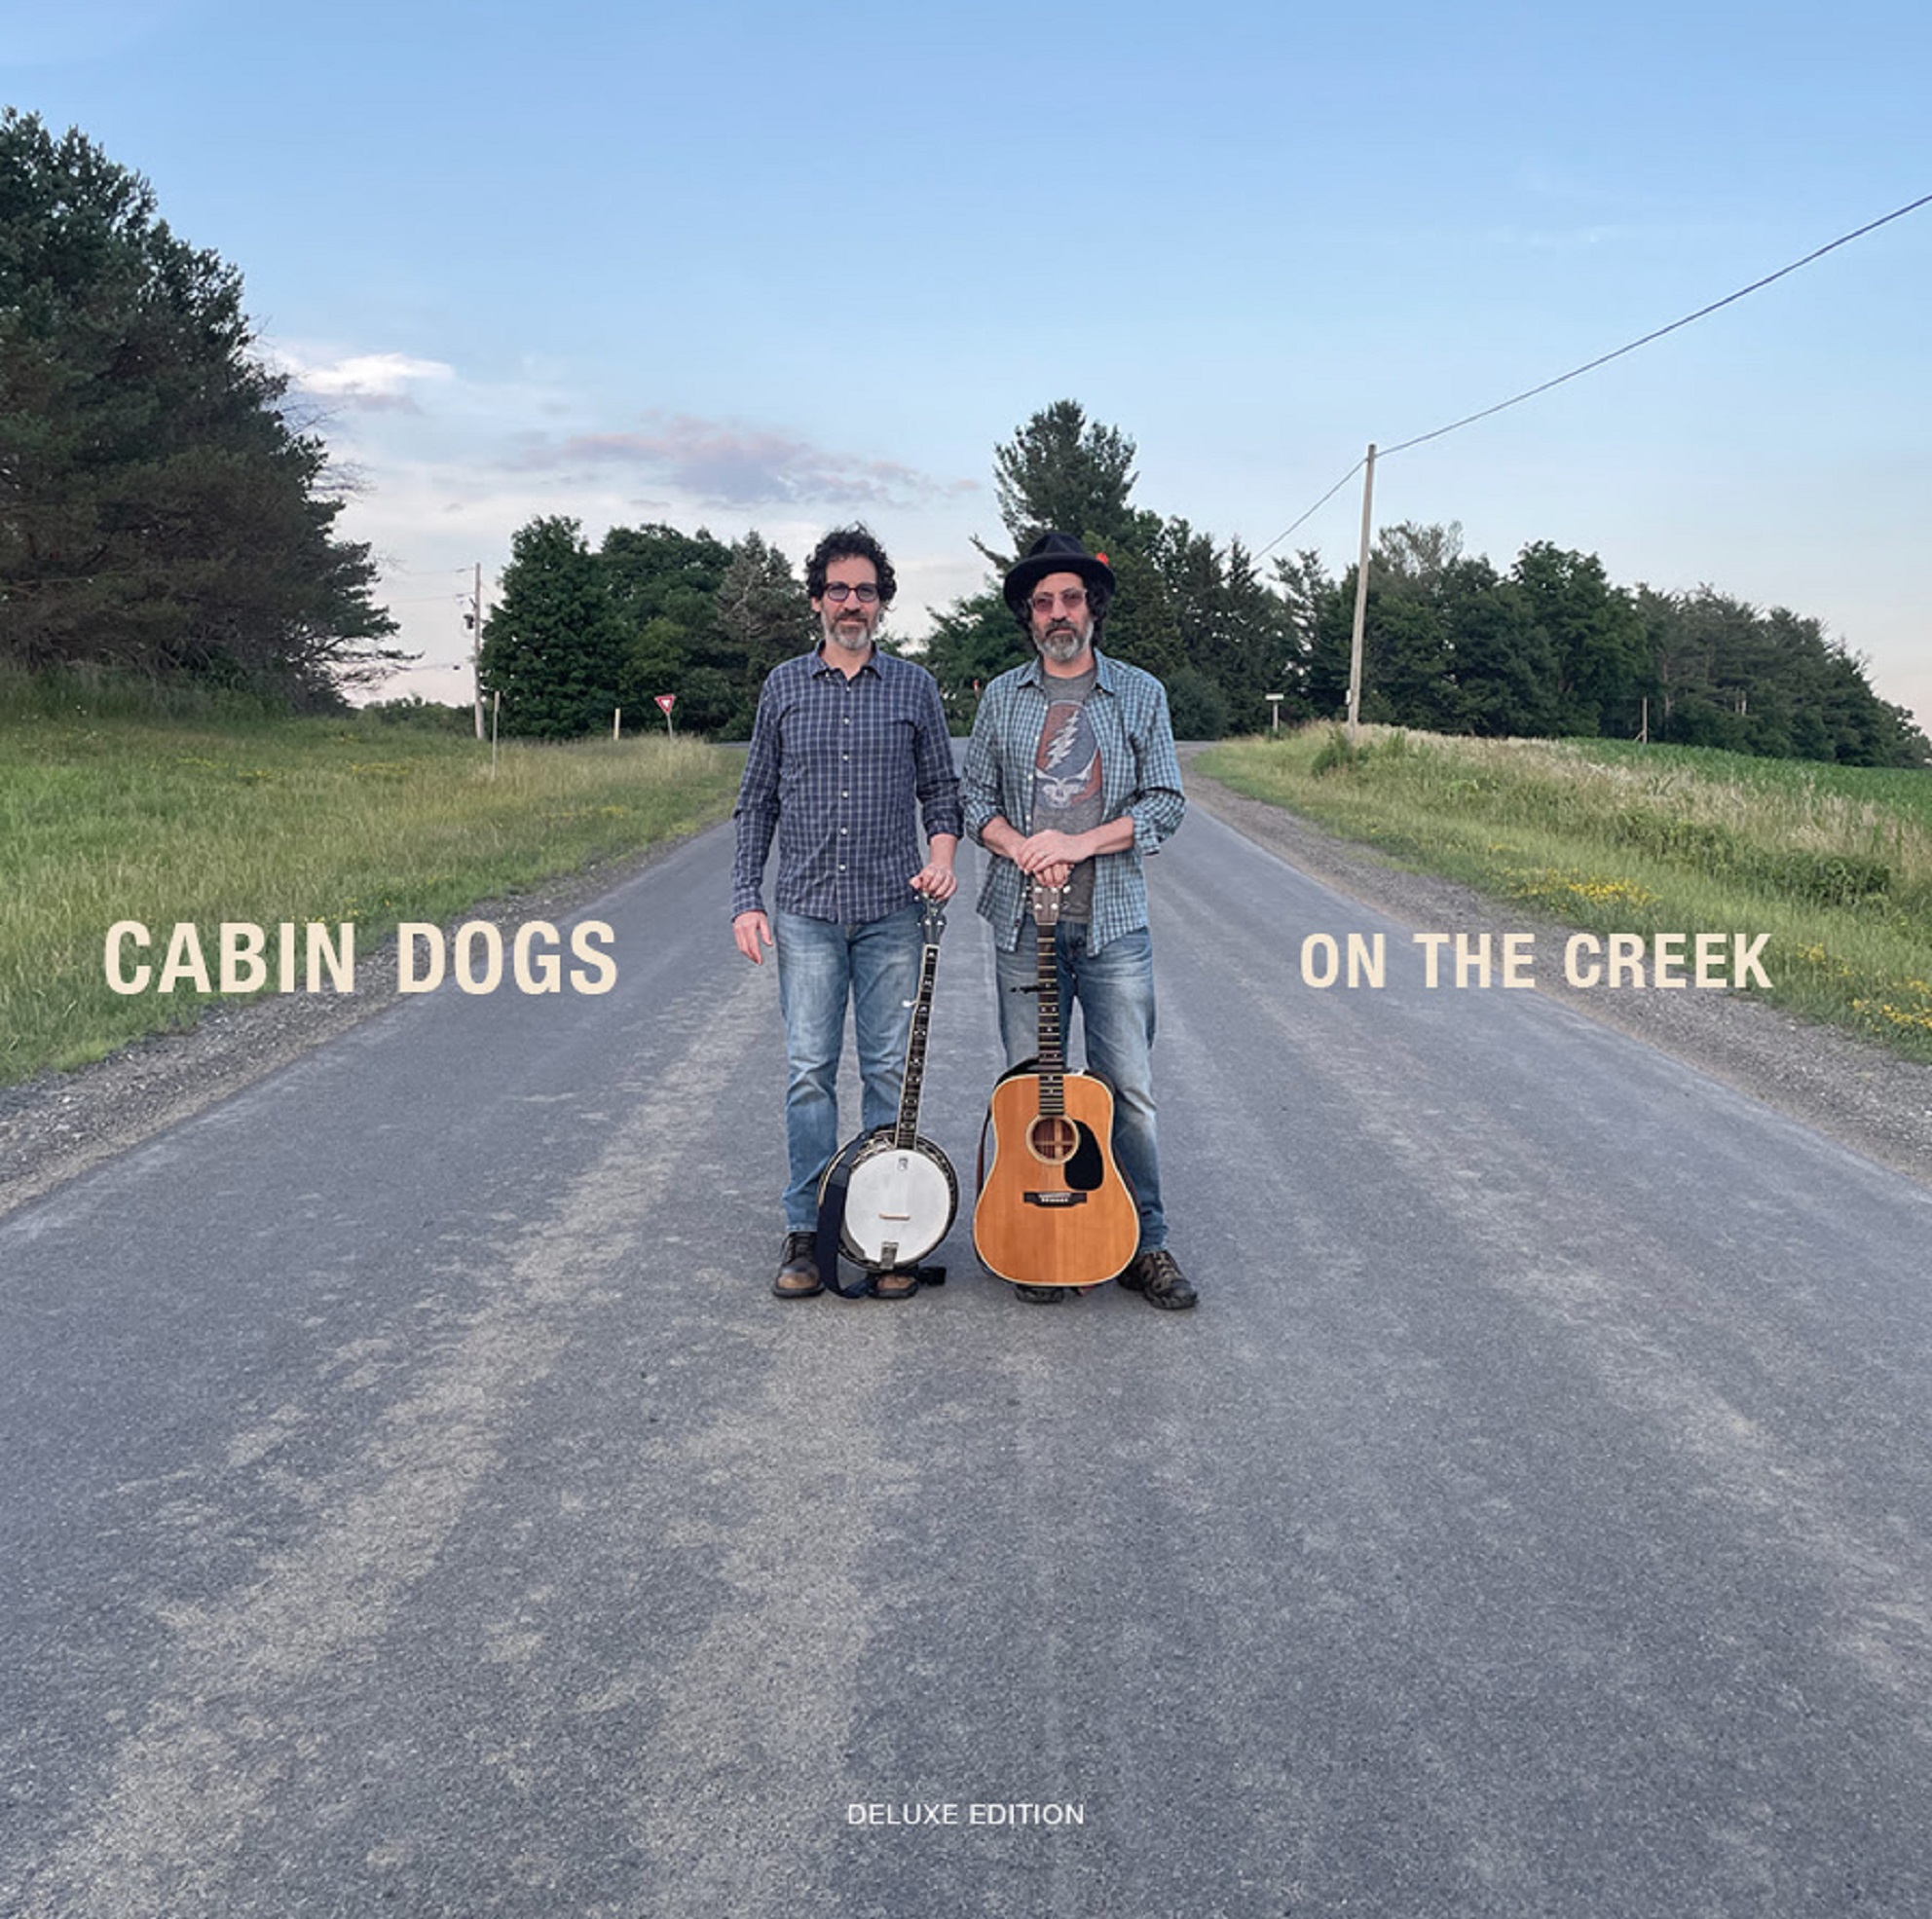 Bittersweet & Filled with Hope, Cabin Dogs New LP "On the Creek" Due May 12th